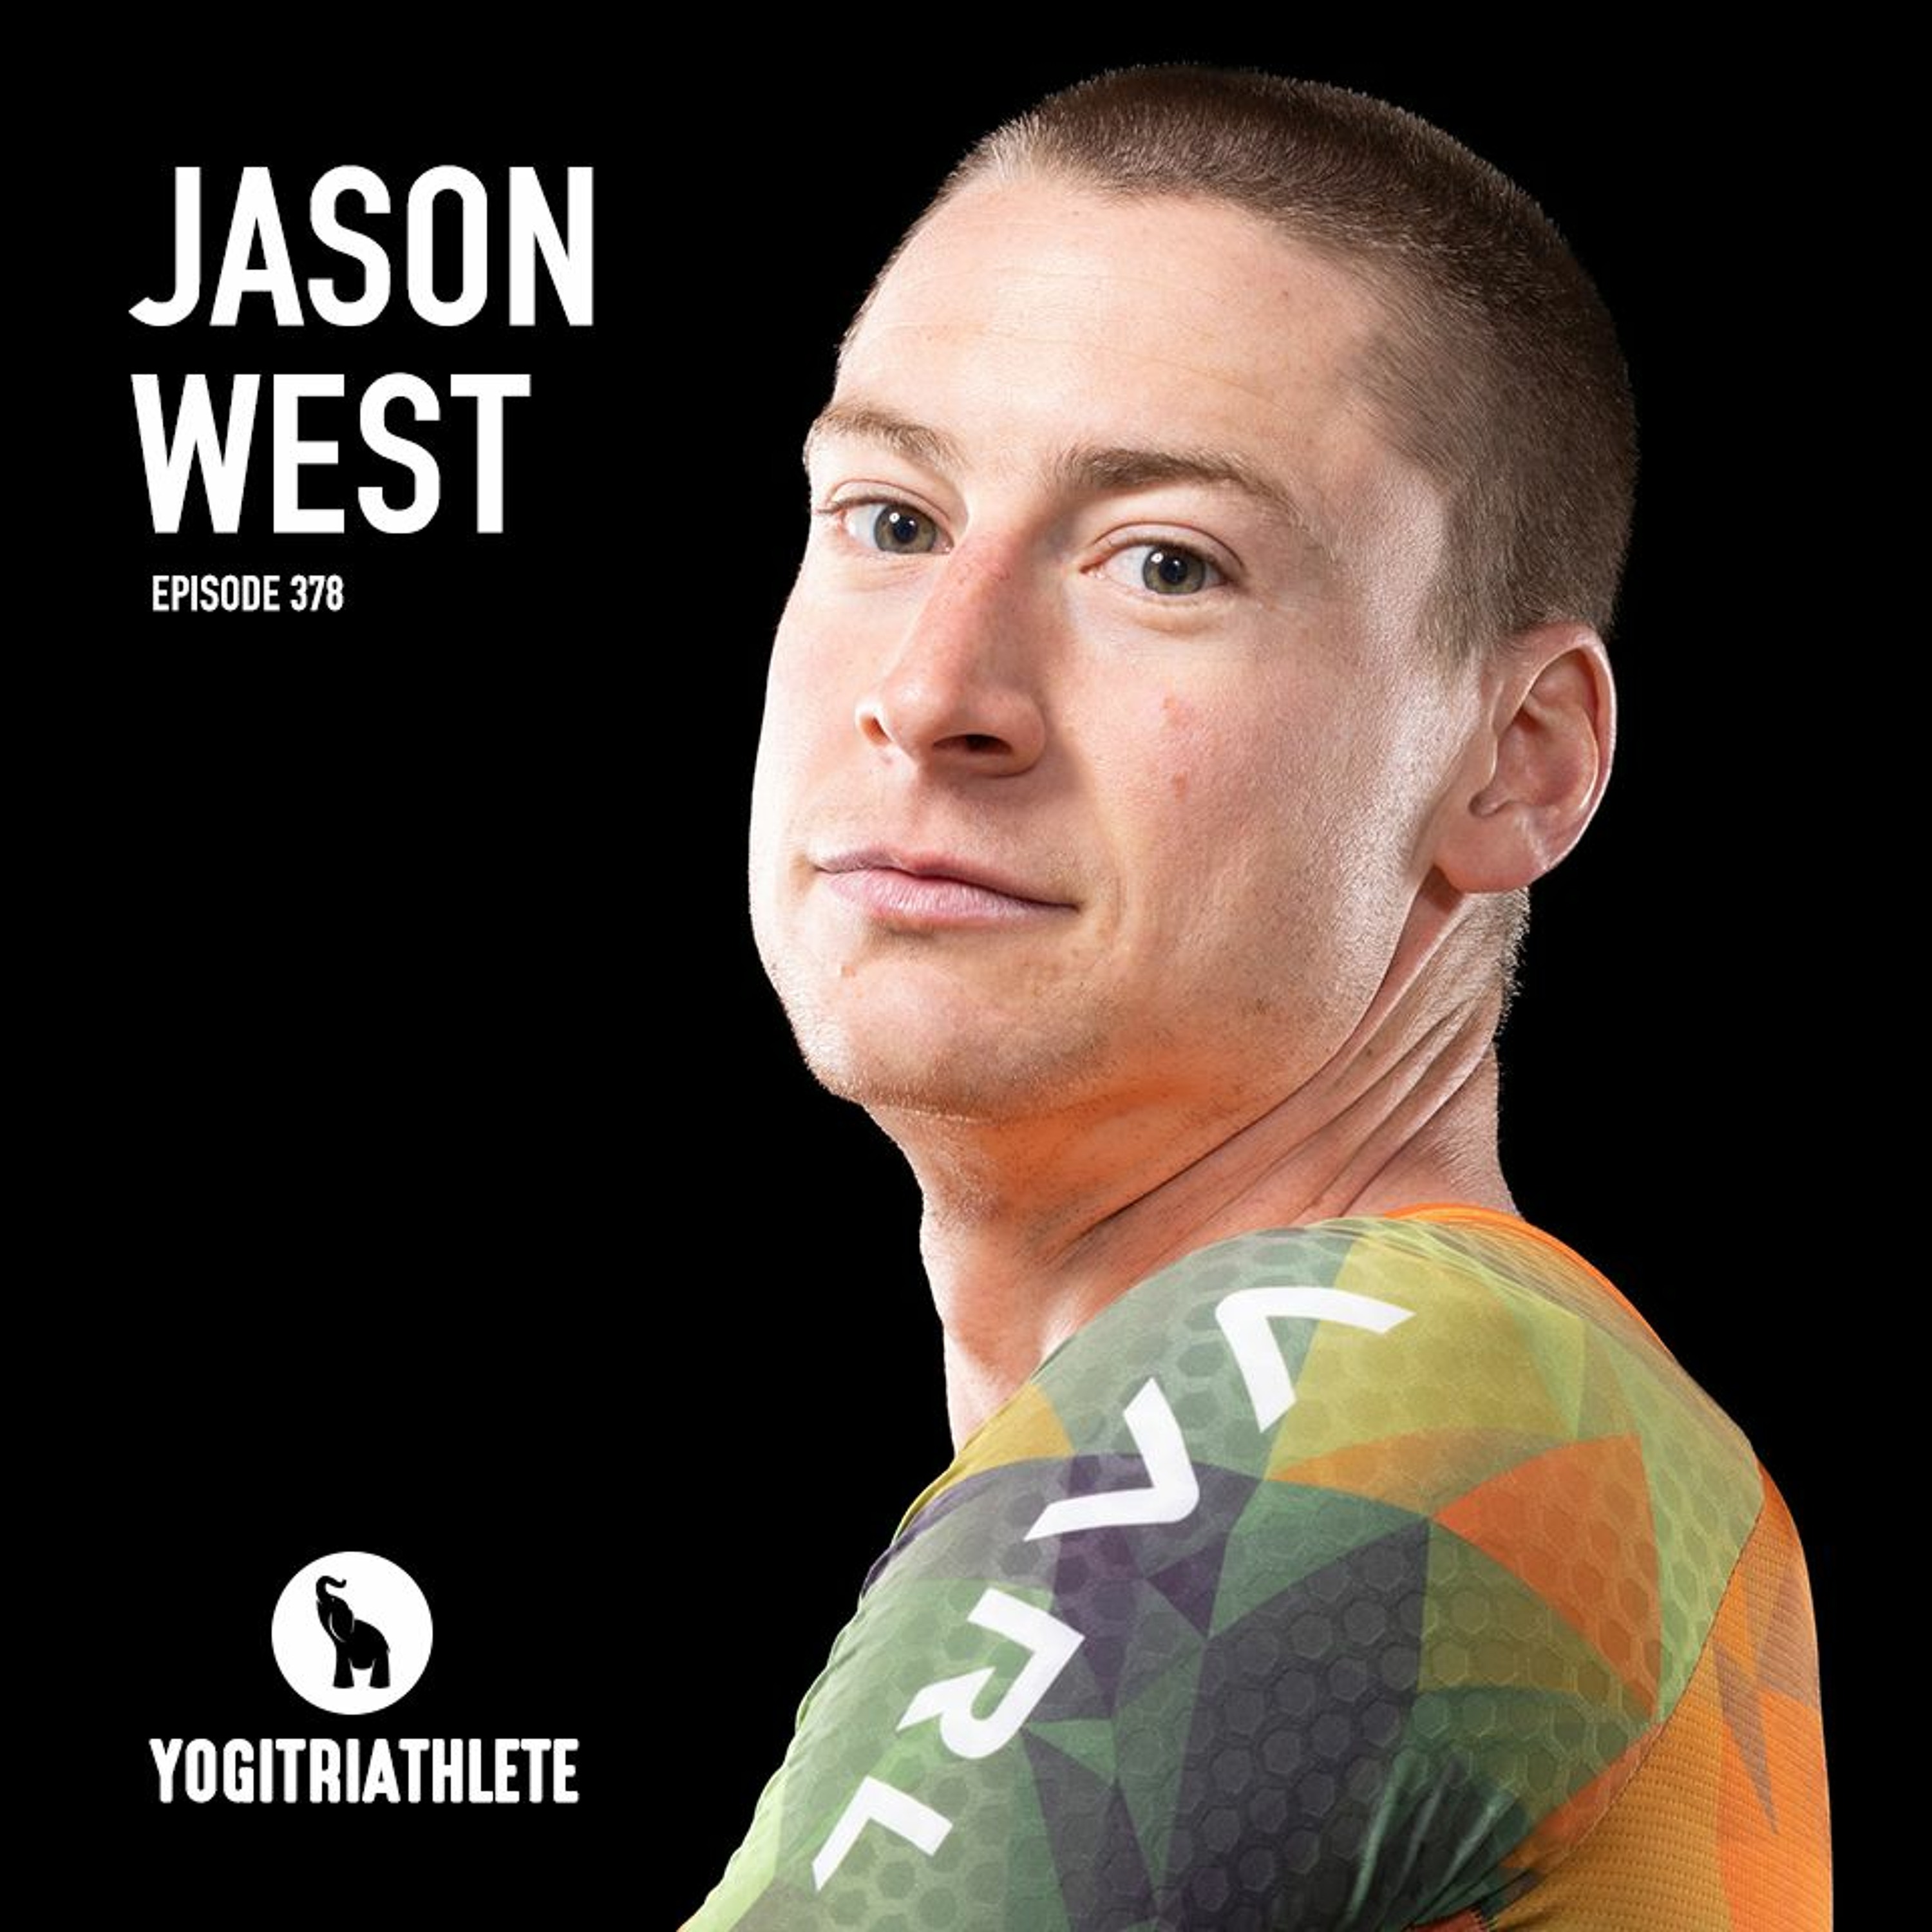 Professional Triathlete Jason West - ”Never give up. Don’t ever give up”